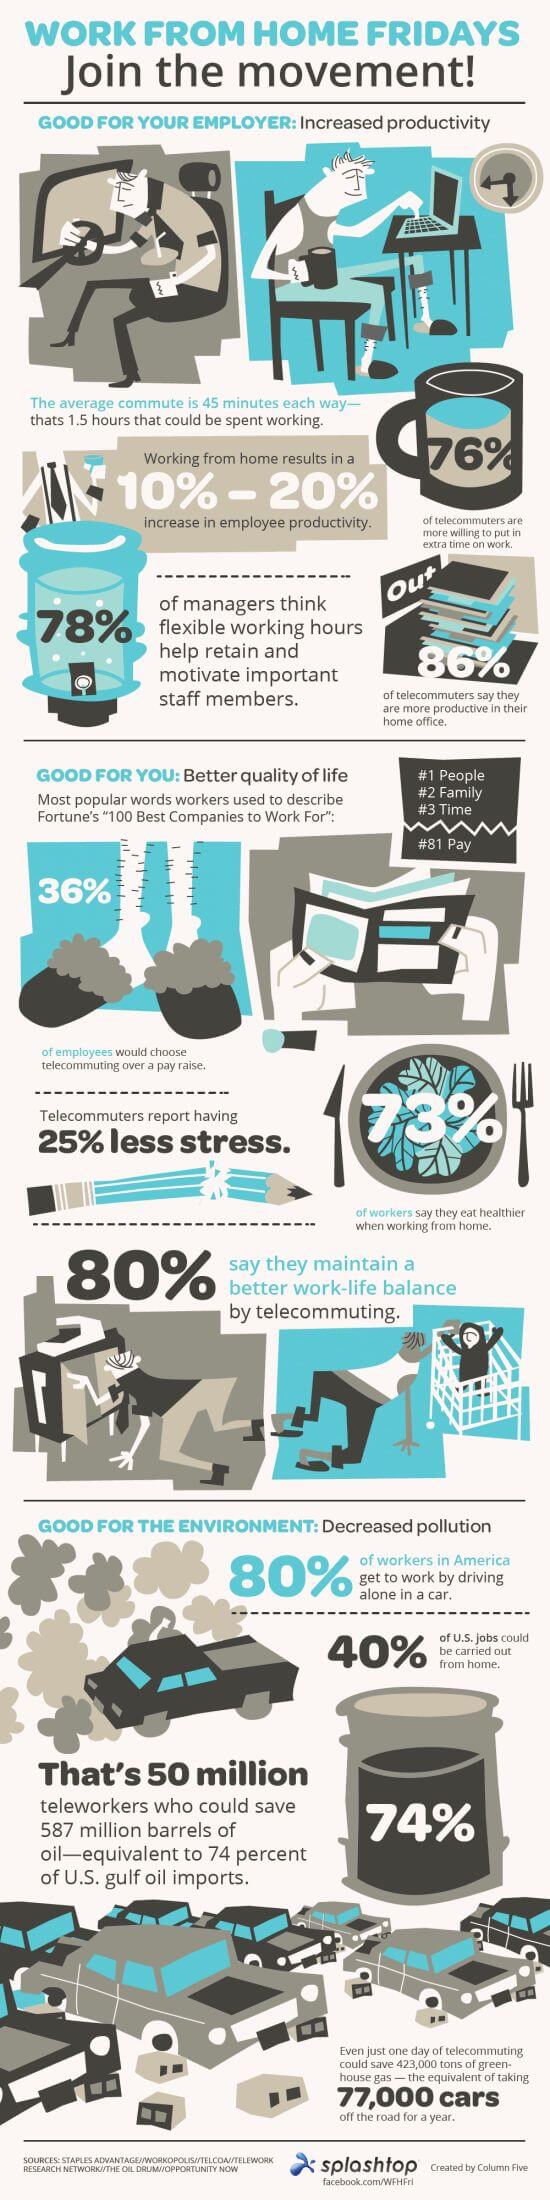 work from home fridays infographic